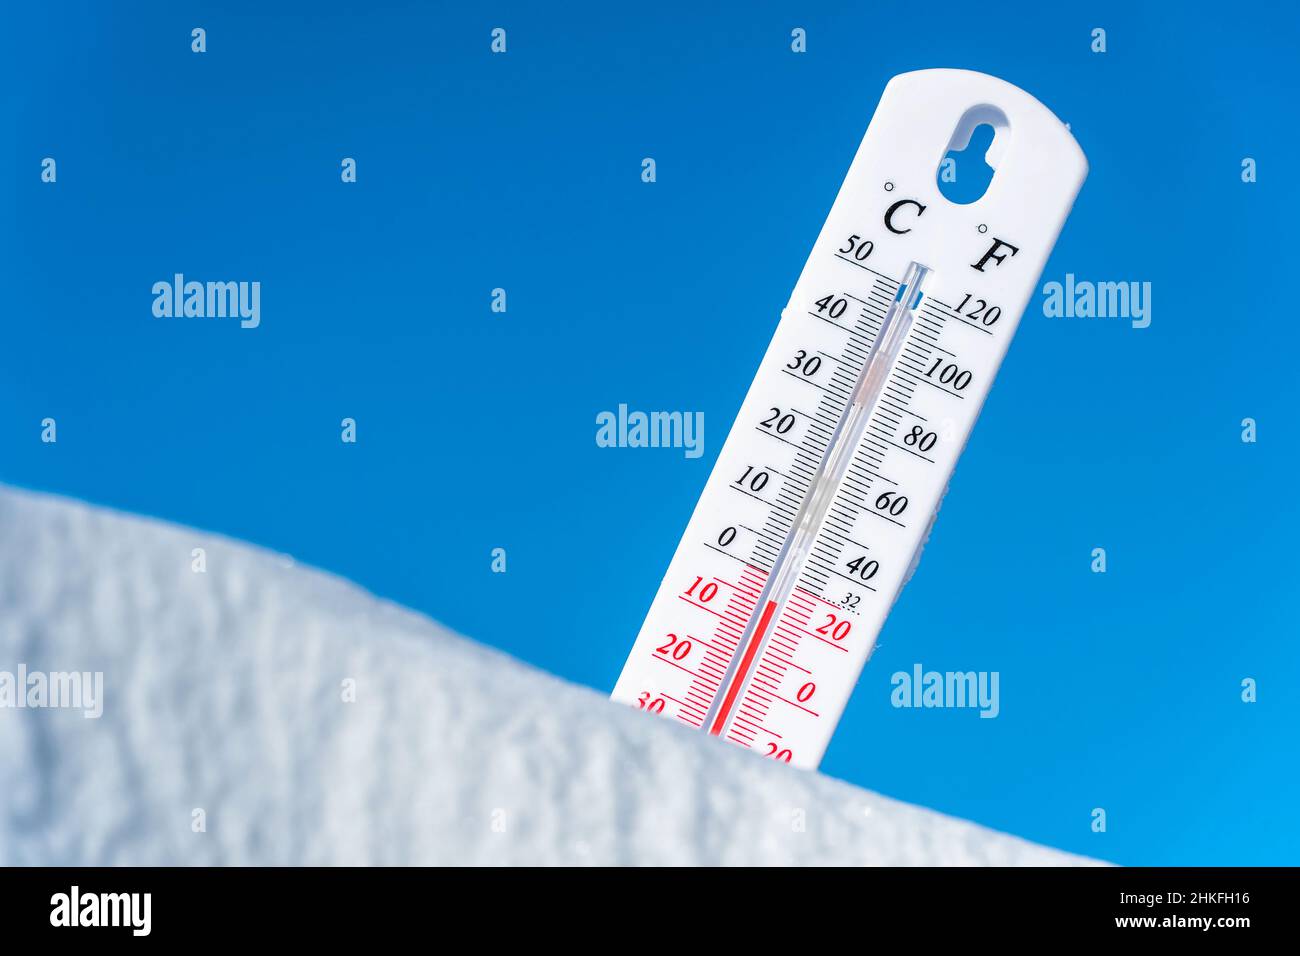 Thermometer in the snow. Climate, weather, forecast. Temperatures outside. Thermometer in the snow shows temperatures below zero. Low temperatures in Stock Photo